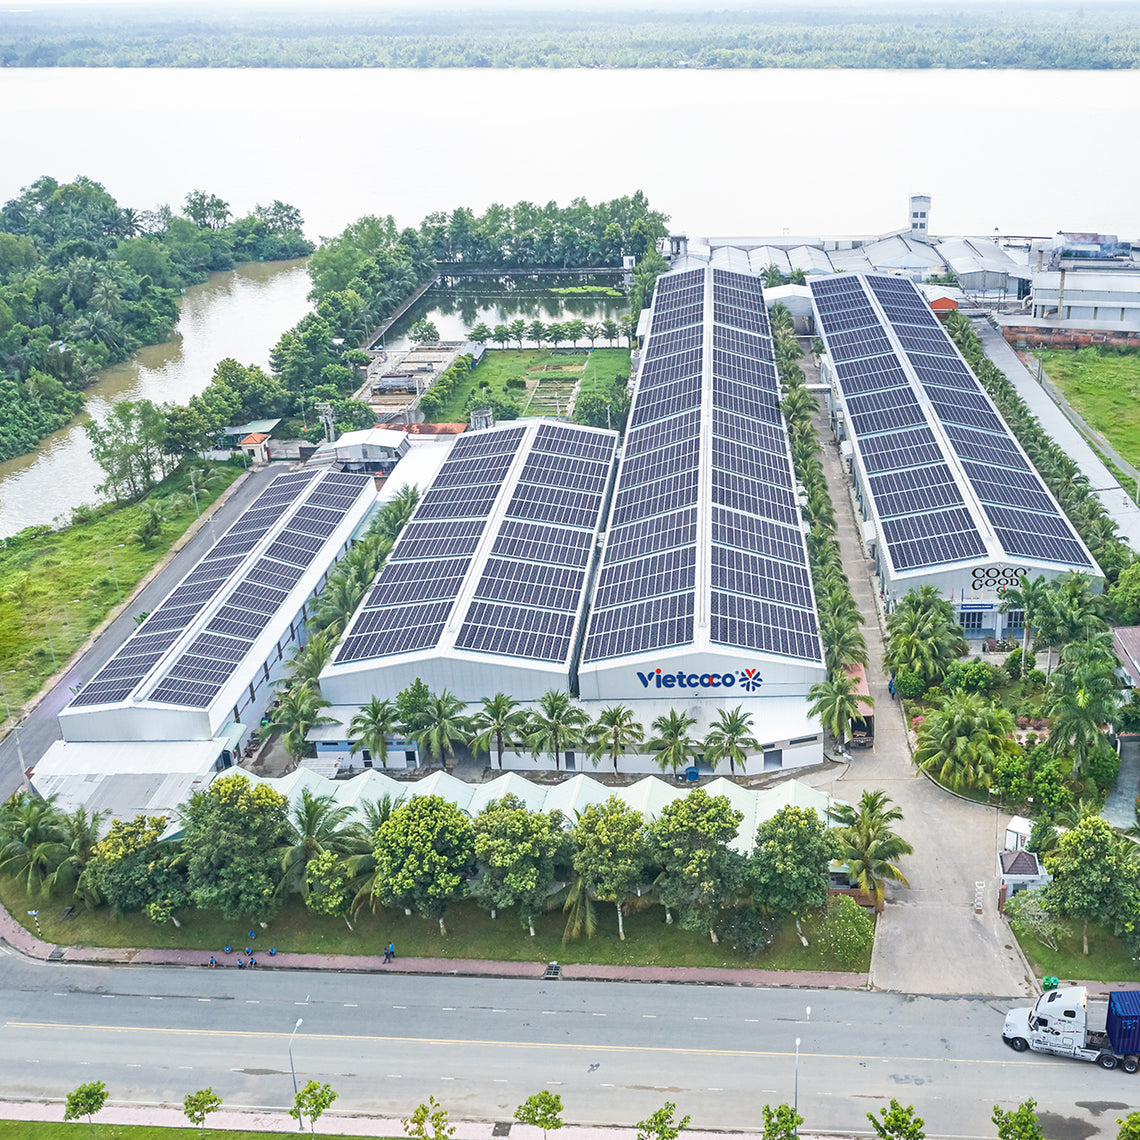 CocoGoodsCo's Solar Powered Factory Targets to Cut Carbon Footprint As Sustainable Growth Commitment